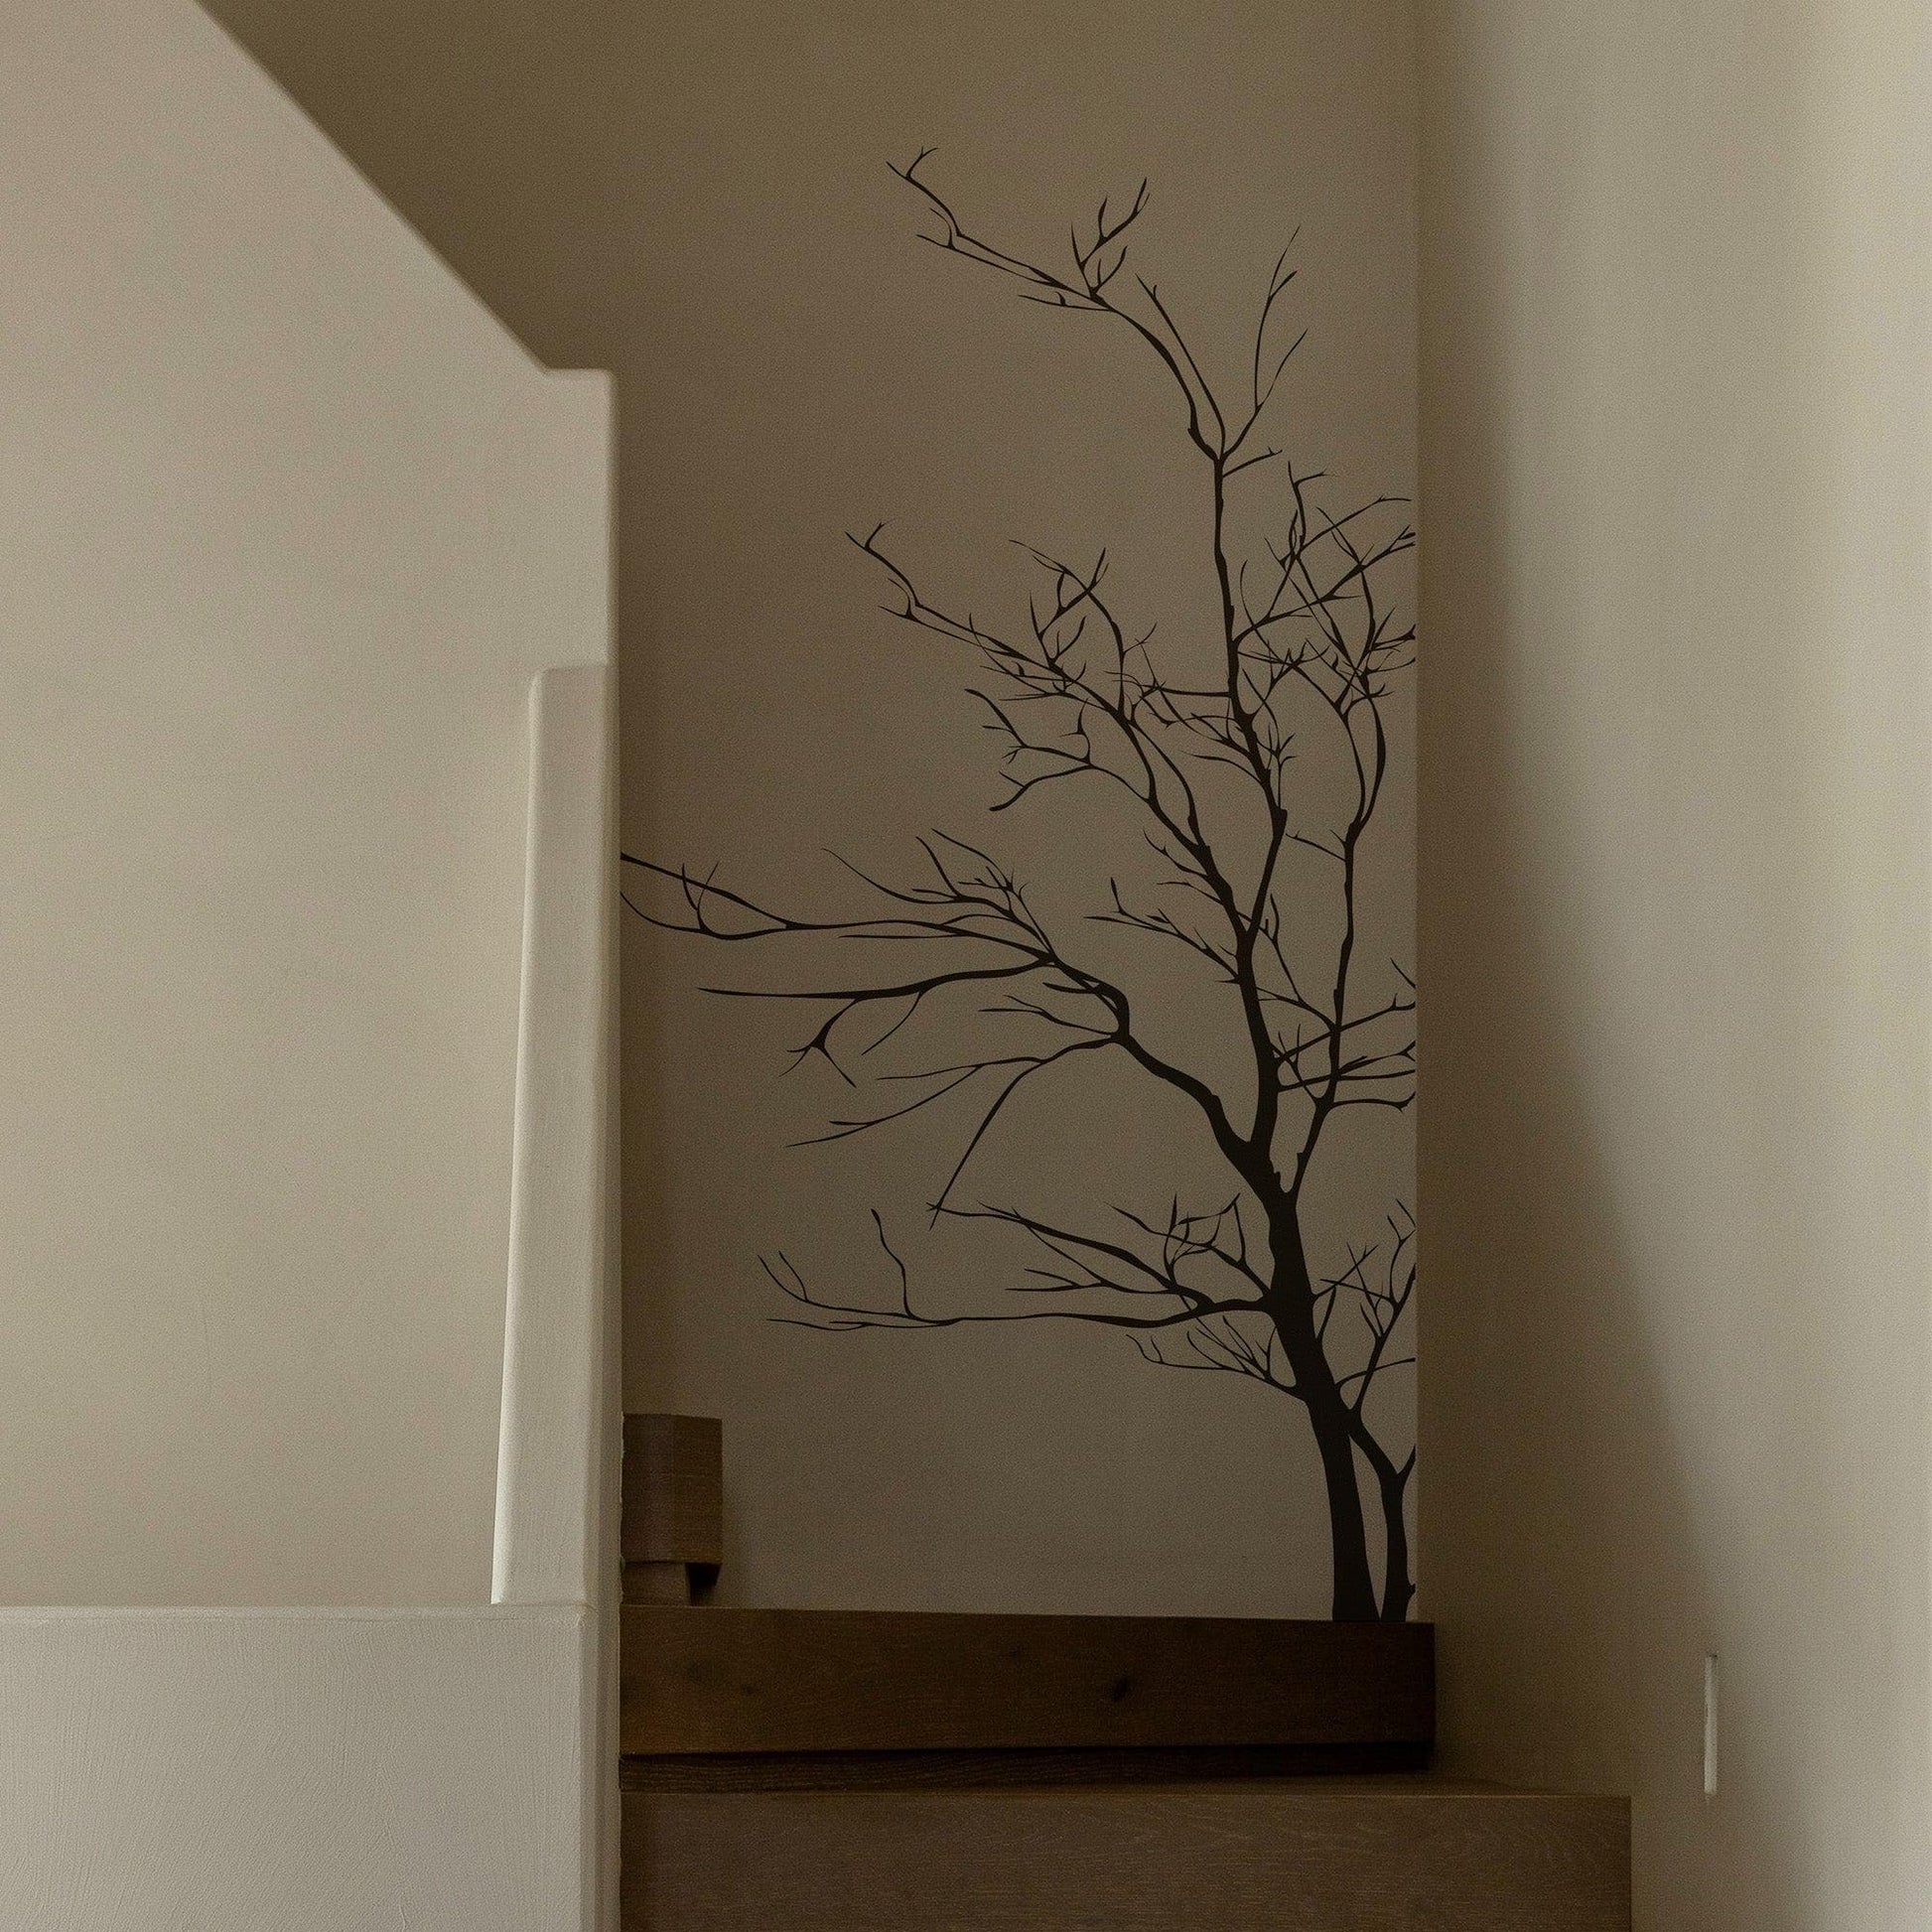 A black tree decal on a white wall near a staircase.